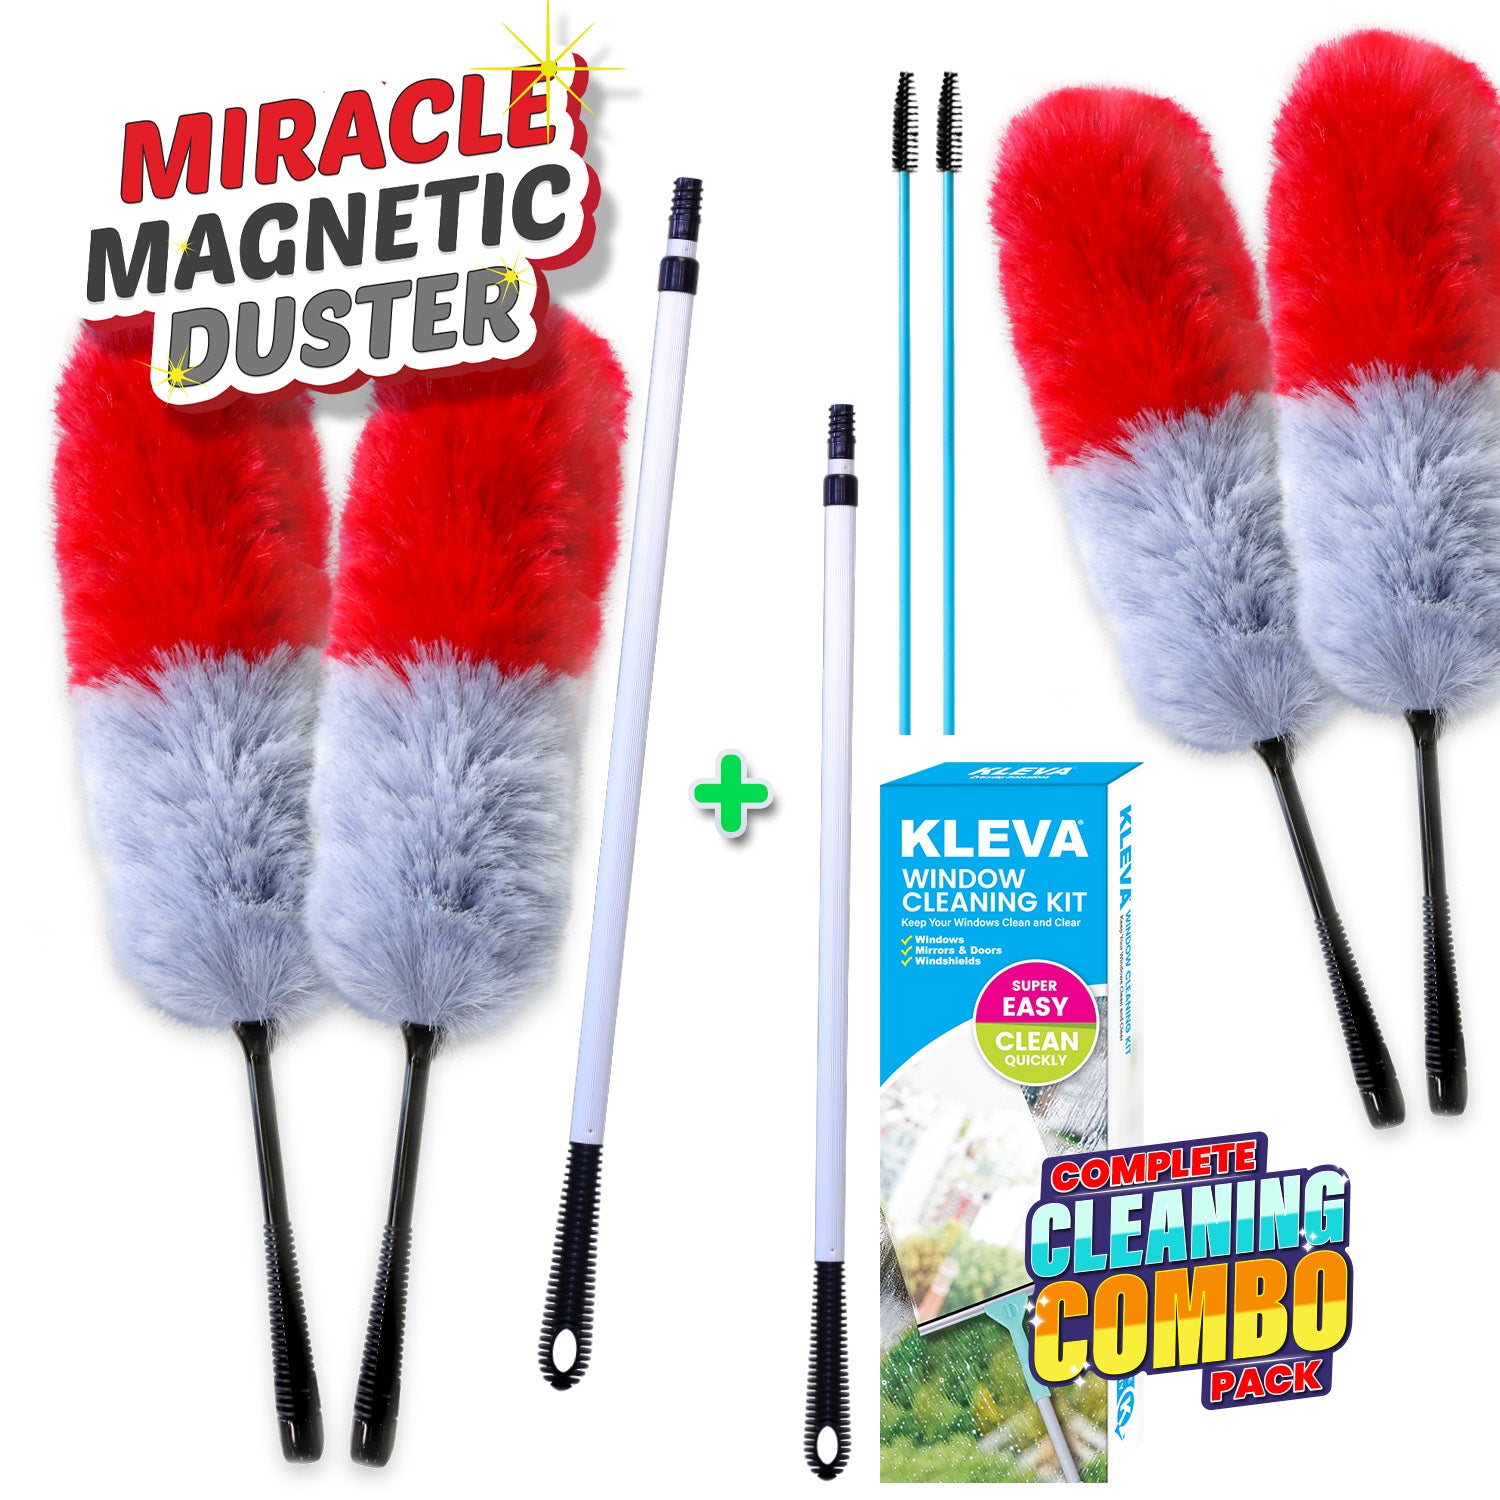 Image of Miracle Magnetic Duster TV Offer With 2x BONUS Extension Poles + FREE Gifts!